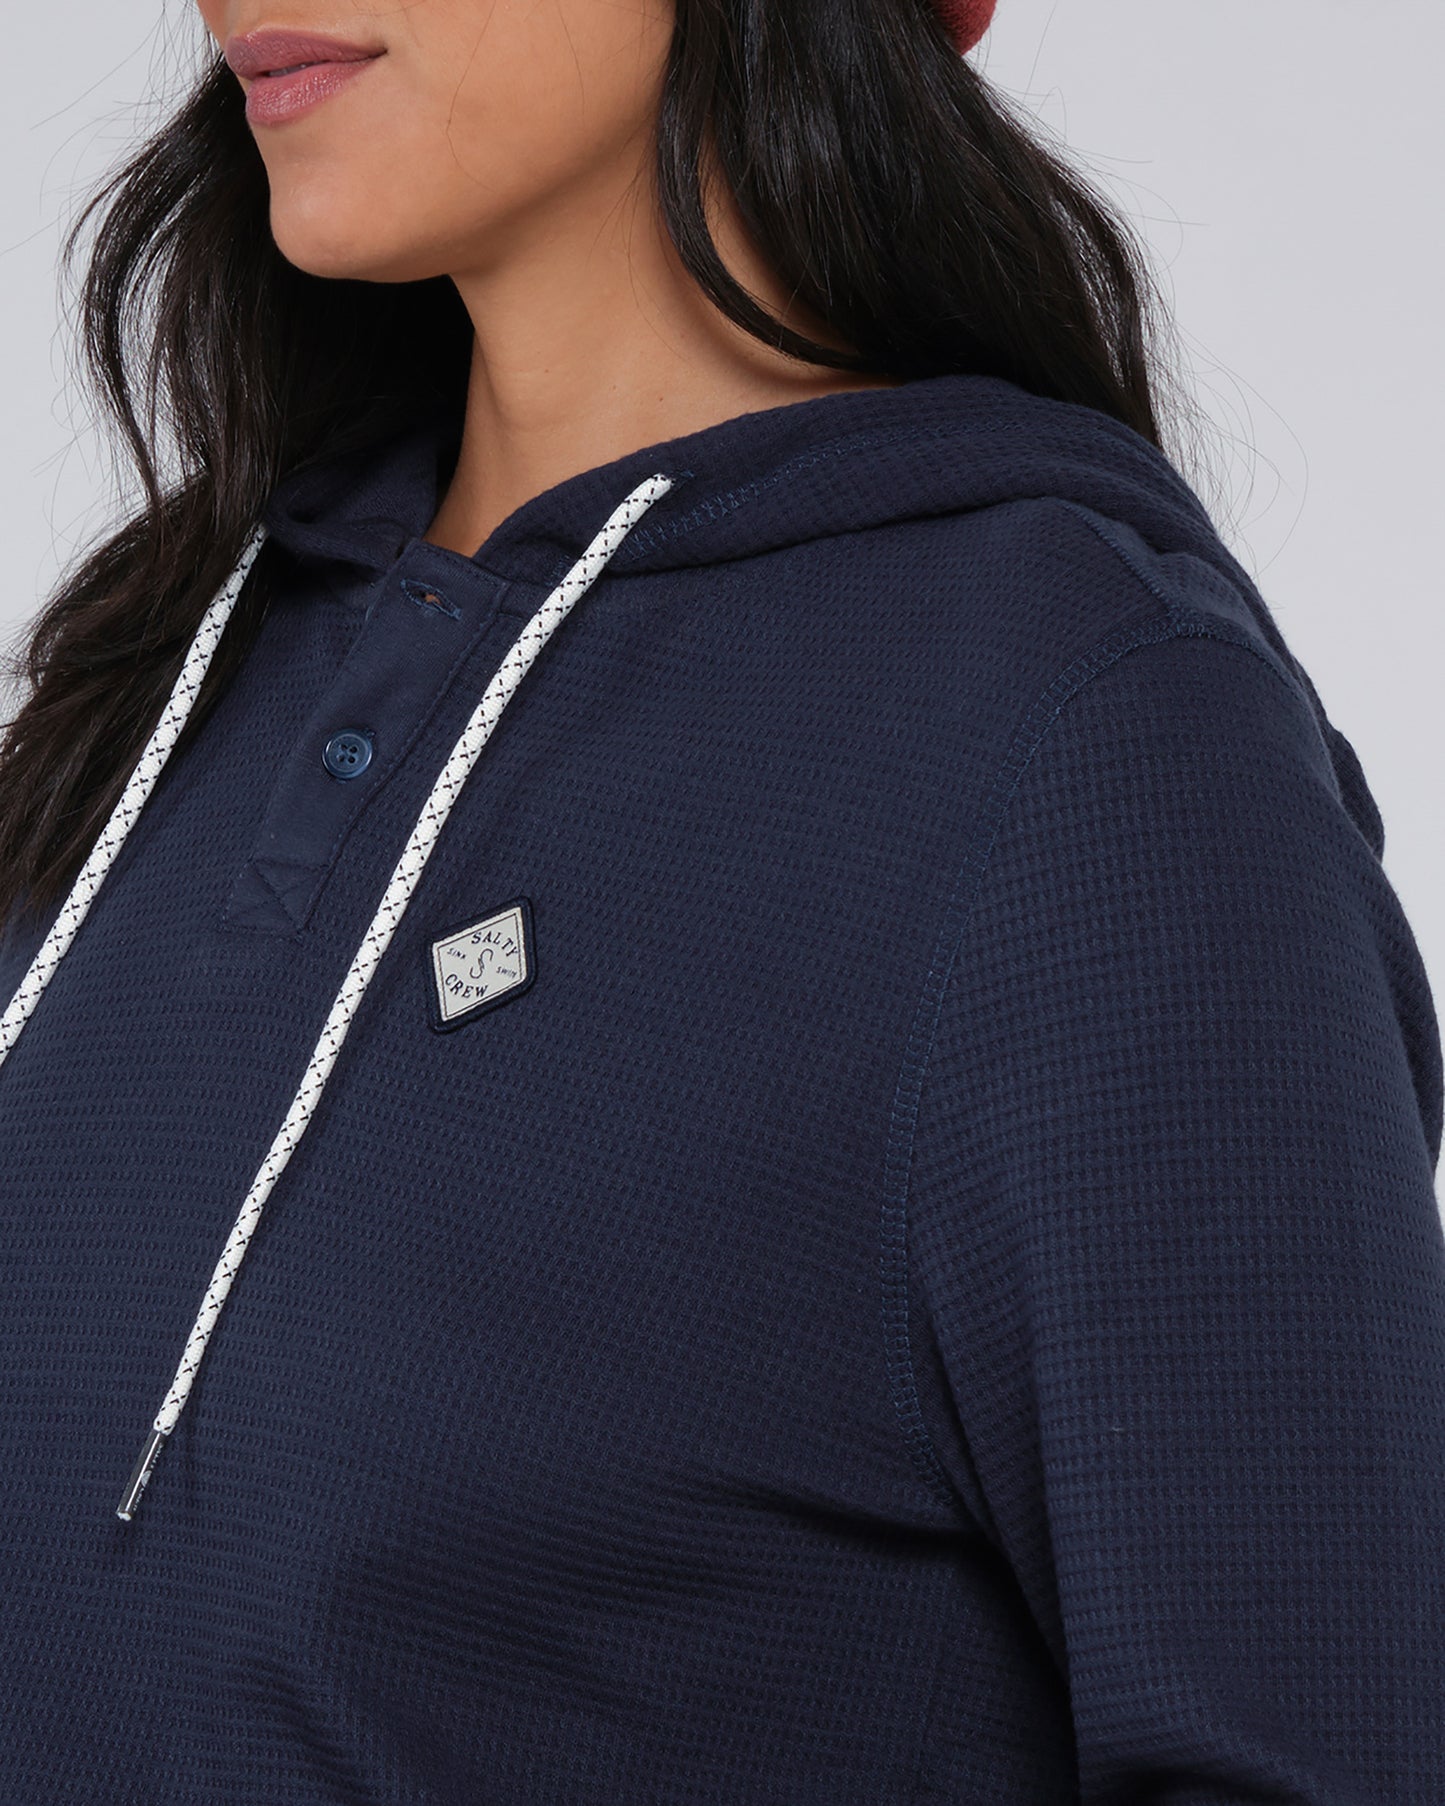 On body close up of the Tippet Henley Dark Navy Hoody